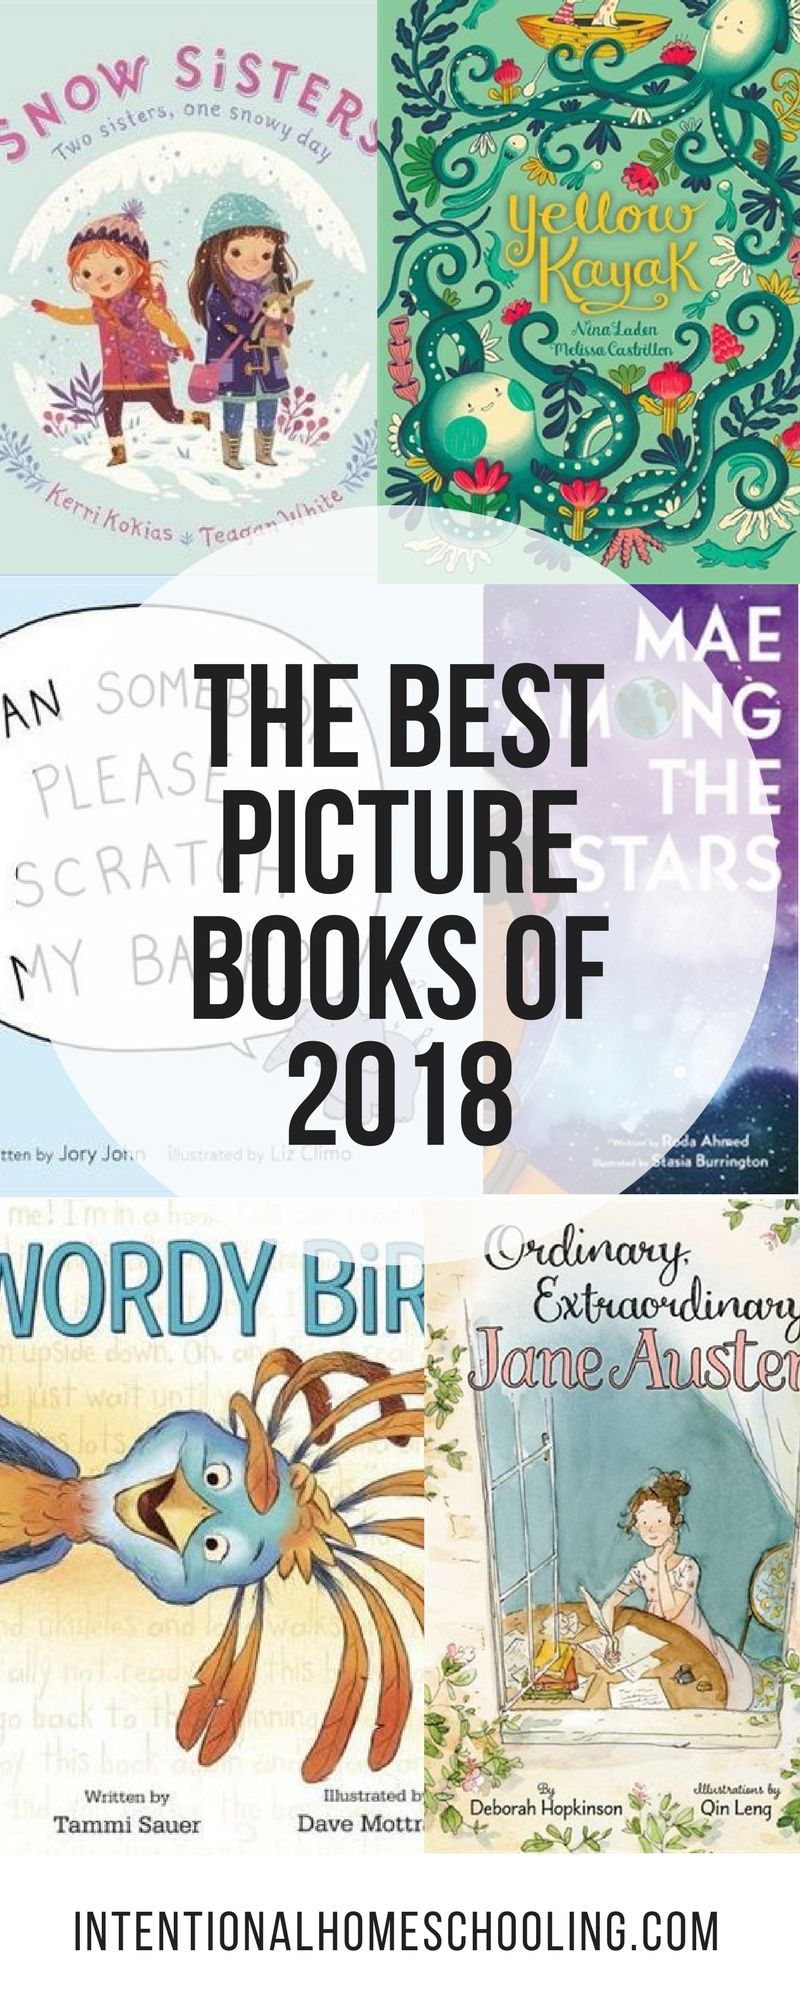 The Best Picture Books of 2018 - Part One - the best picture books so far this year